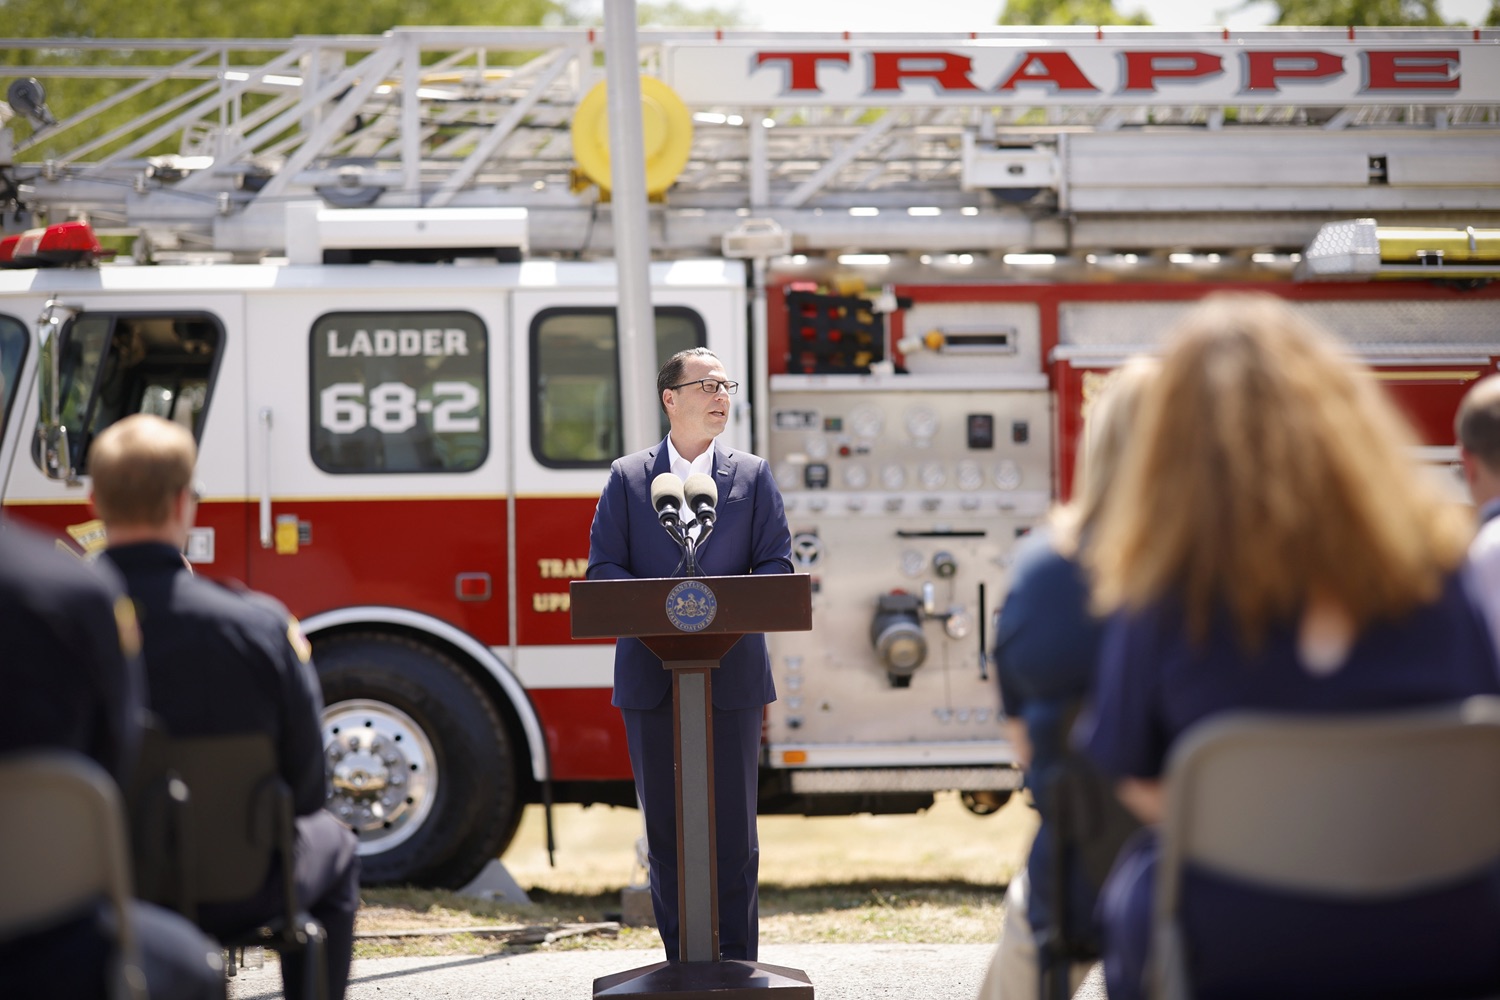 Pennsylvania Governor Josh Shapiro speaks with the press.   Governor Josh Shapiro delivered remarks at the Trappe Fire Company's new station groundbreaking in Montgomery County. The new fire station will be the first built in Trappe since 1911 to help the volunteer company continue to serve Trappe and Upper Providence townships with a new facility and updated resources. The new fire station is being built in honor of fallen Trooper Brandon Sisca, who was Fire Chief at Trappe Fire Company at the time of his passing. JUNE 04, 2023 - TRAPPE, PA<br><a href="https://filesource.amperwave.net/commonwealthofpa/photo/23197_gov_trappeFire_dz_001.JPG" target="_blank">⇣ Download Photo</a>